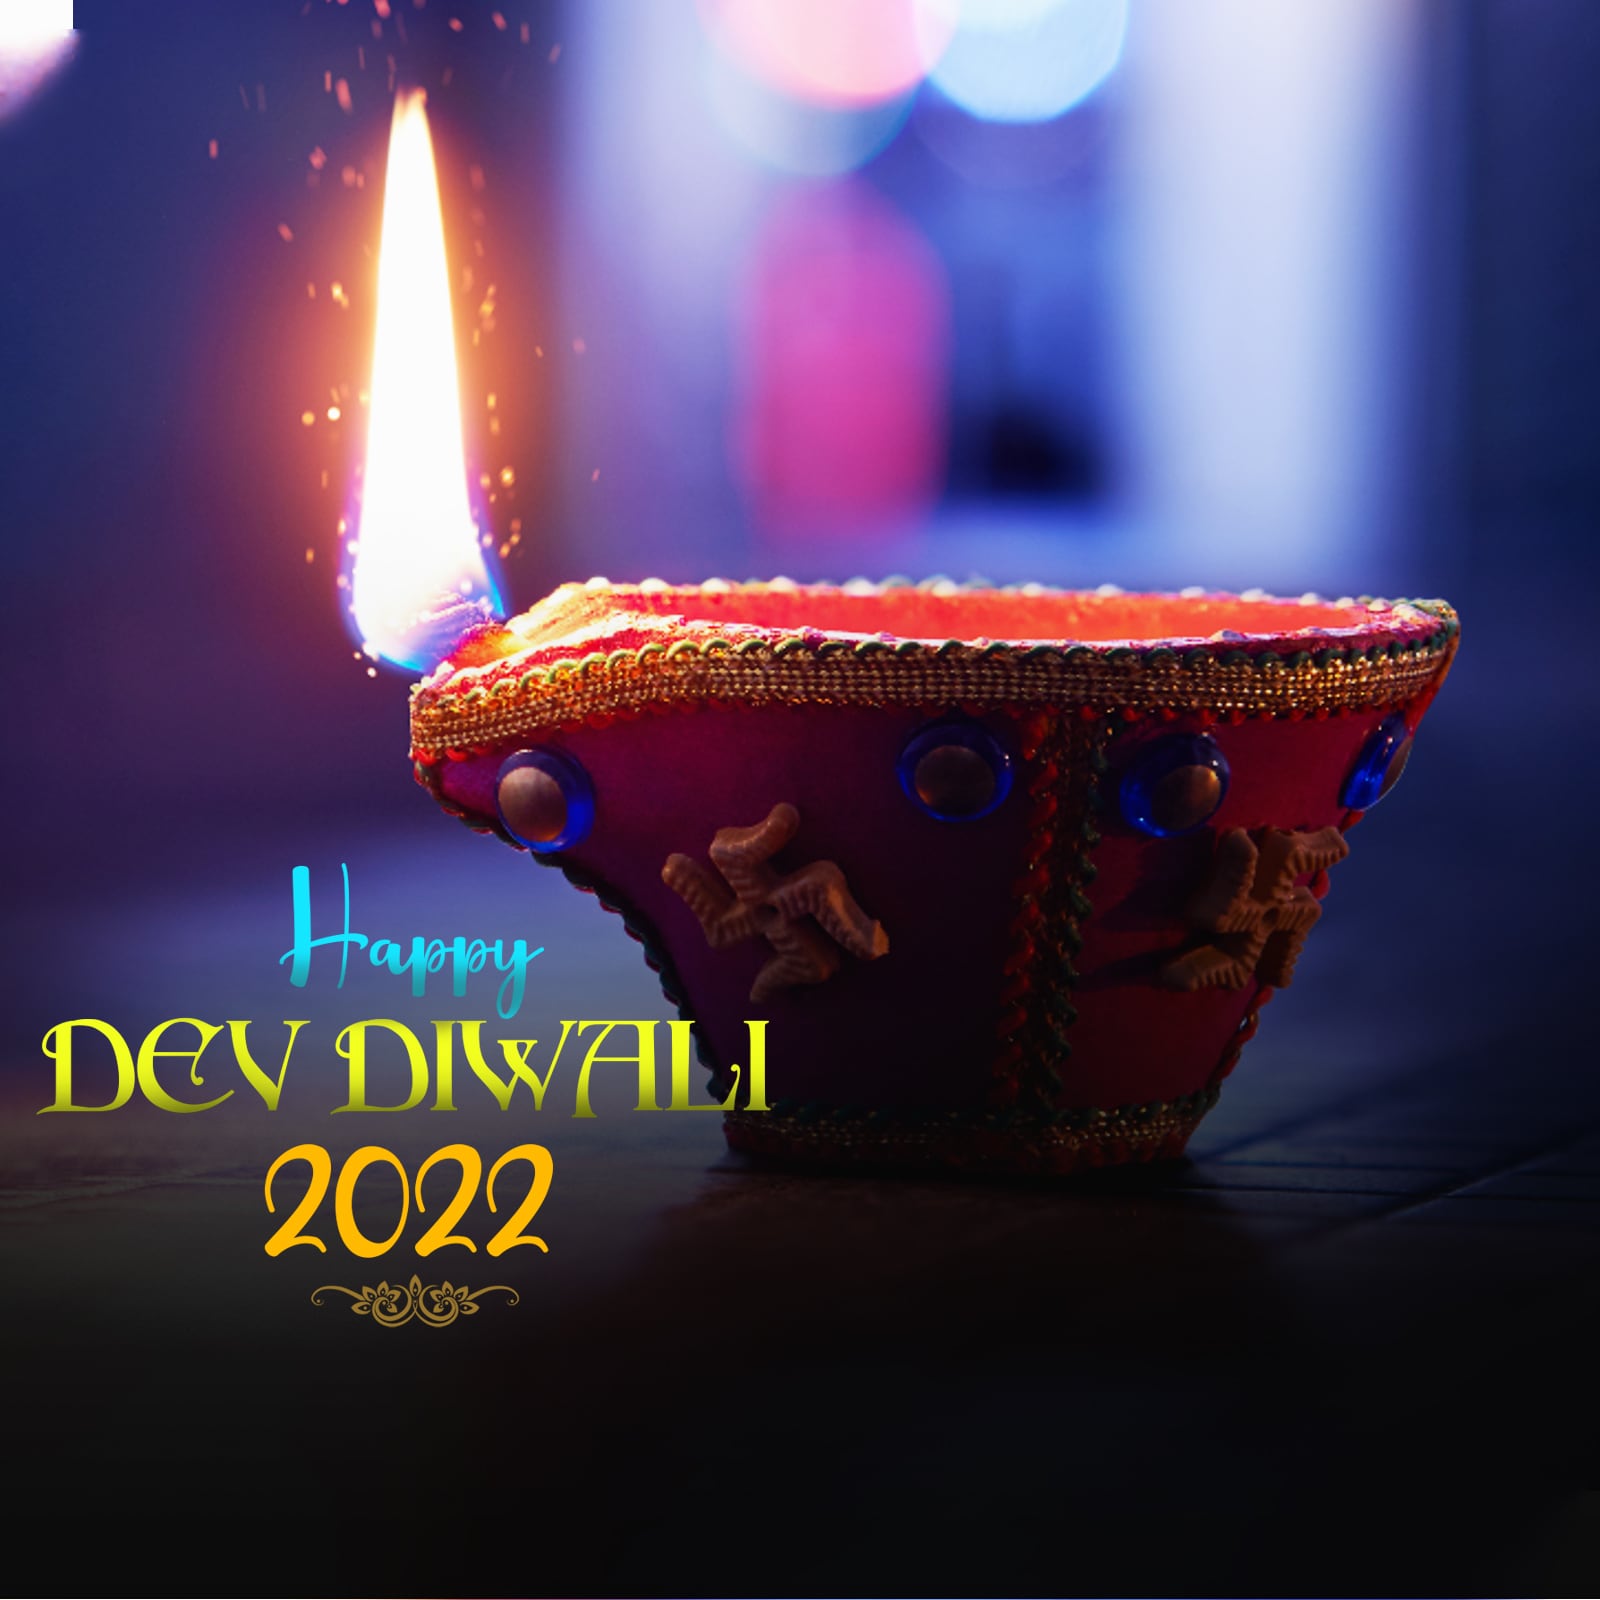 Happy Dev Diwali 2022 Date, wishes, images, greeting and quotes that you can share with your family, friends, relatives and colleagues